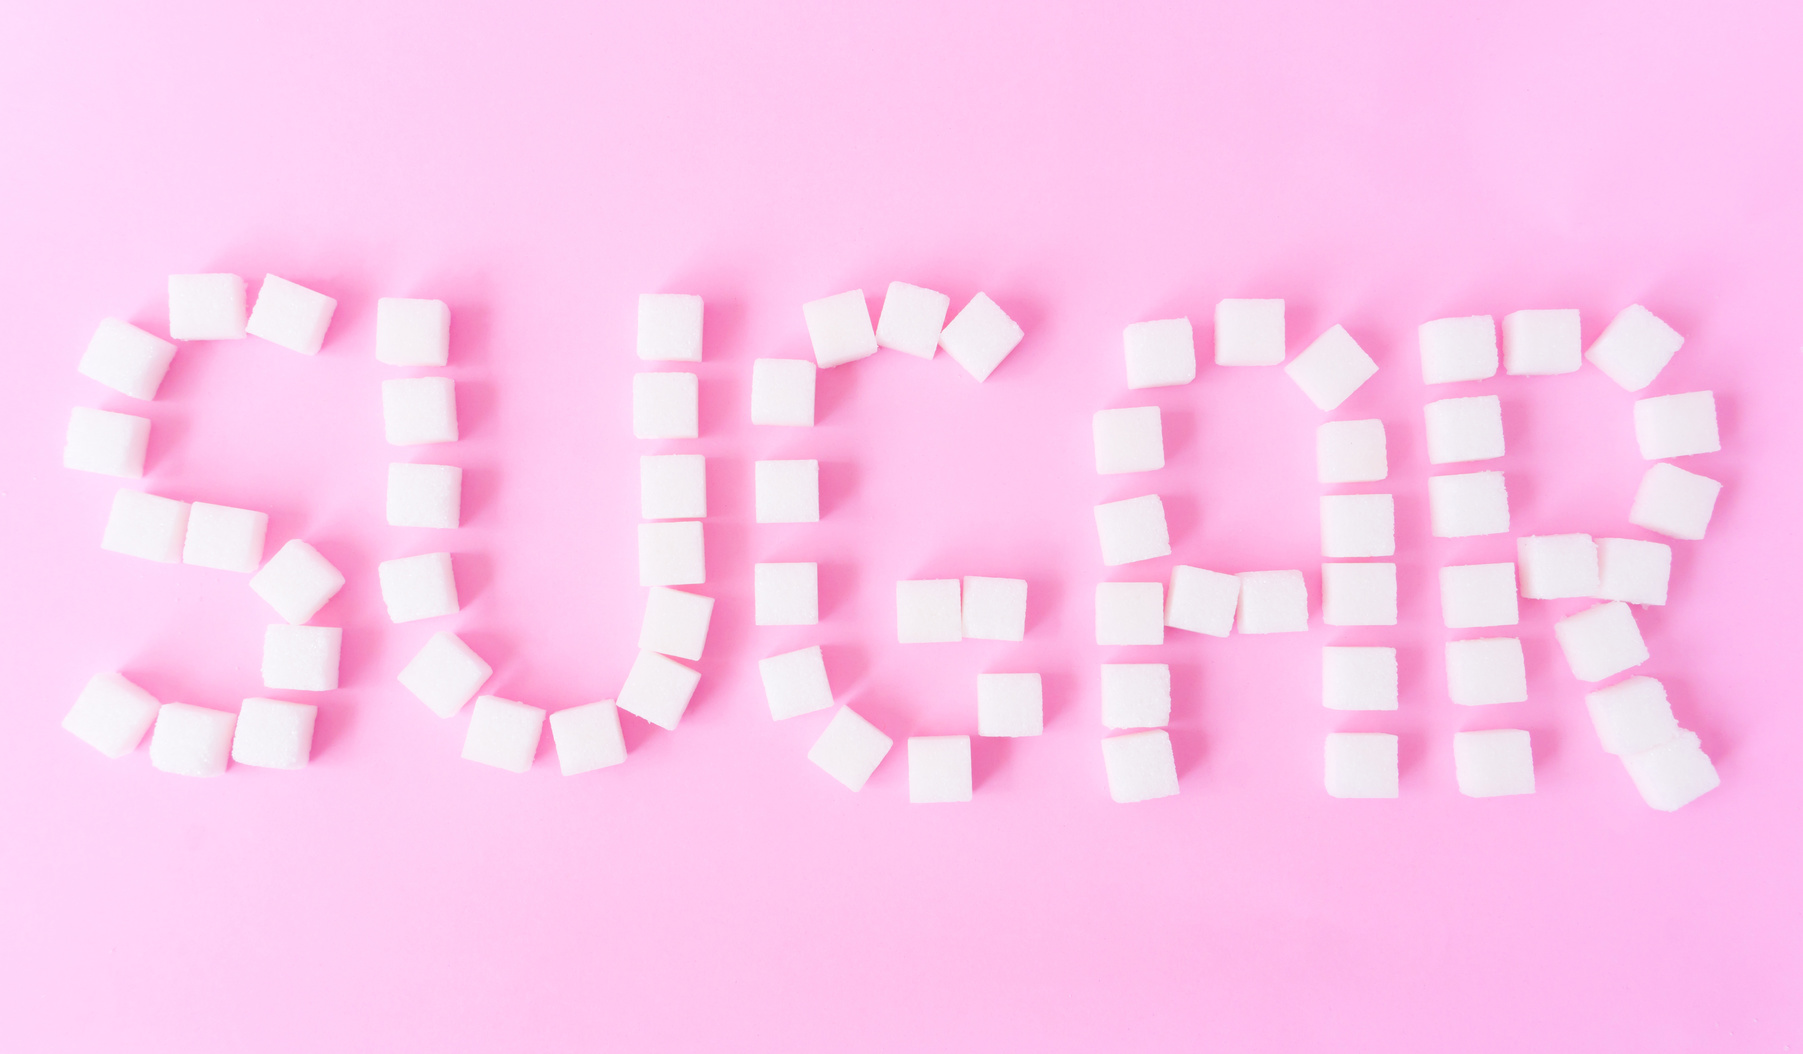 Sugar text with sugar cubes on sweet pink background, food and healthy concept